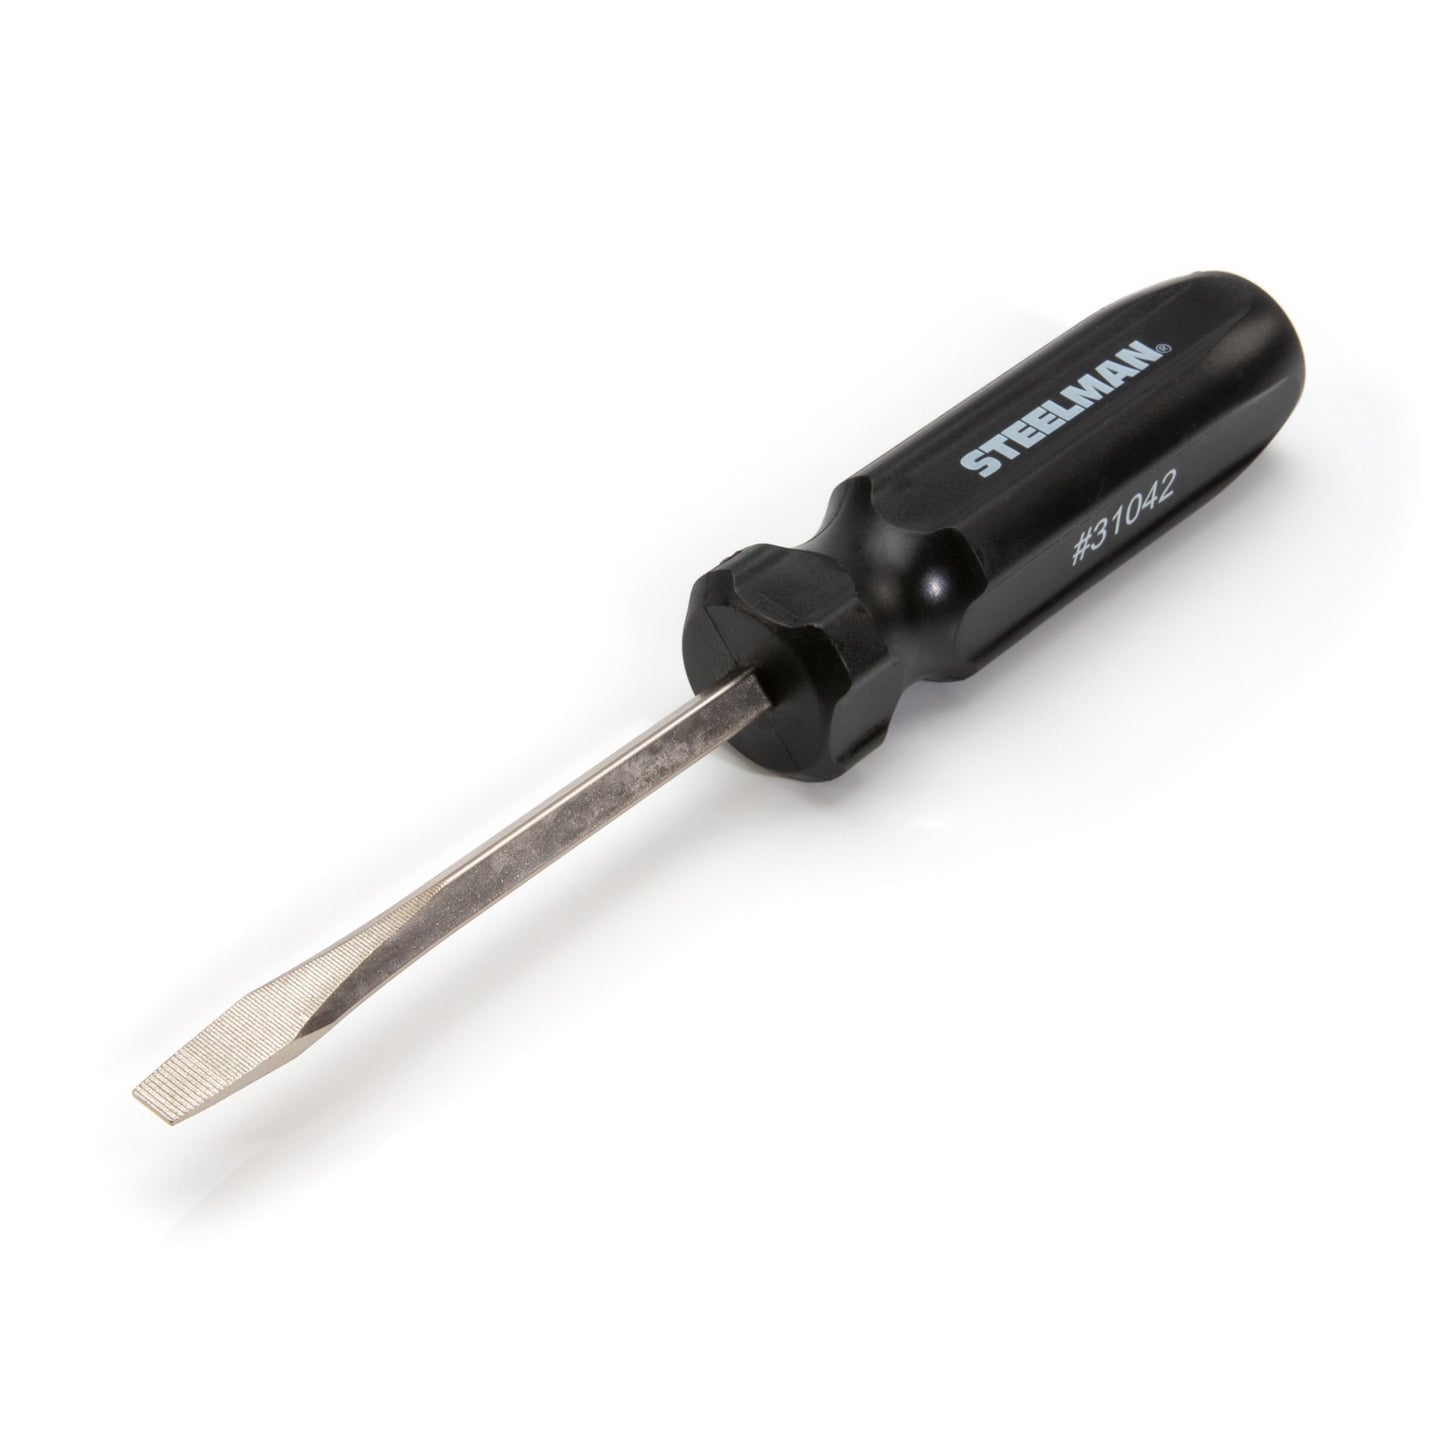 1/4-inch x 4-inch Slotted Tip Screwdriver with Fluted Handle